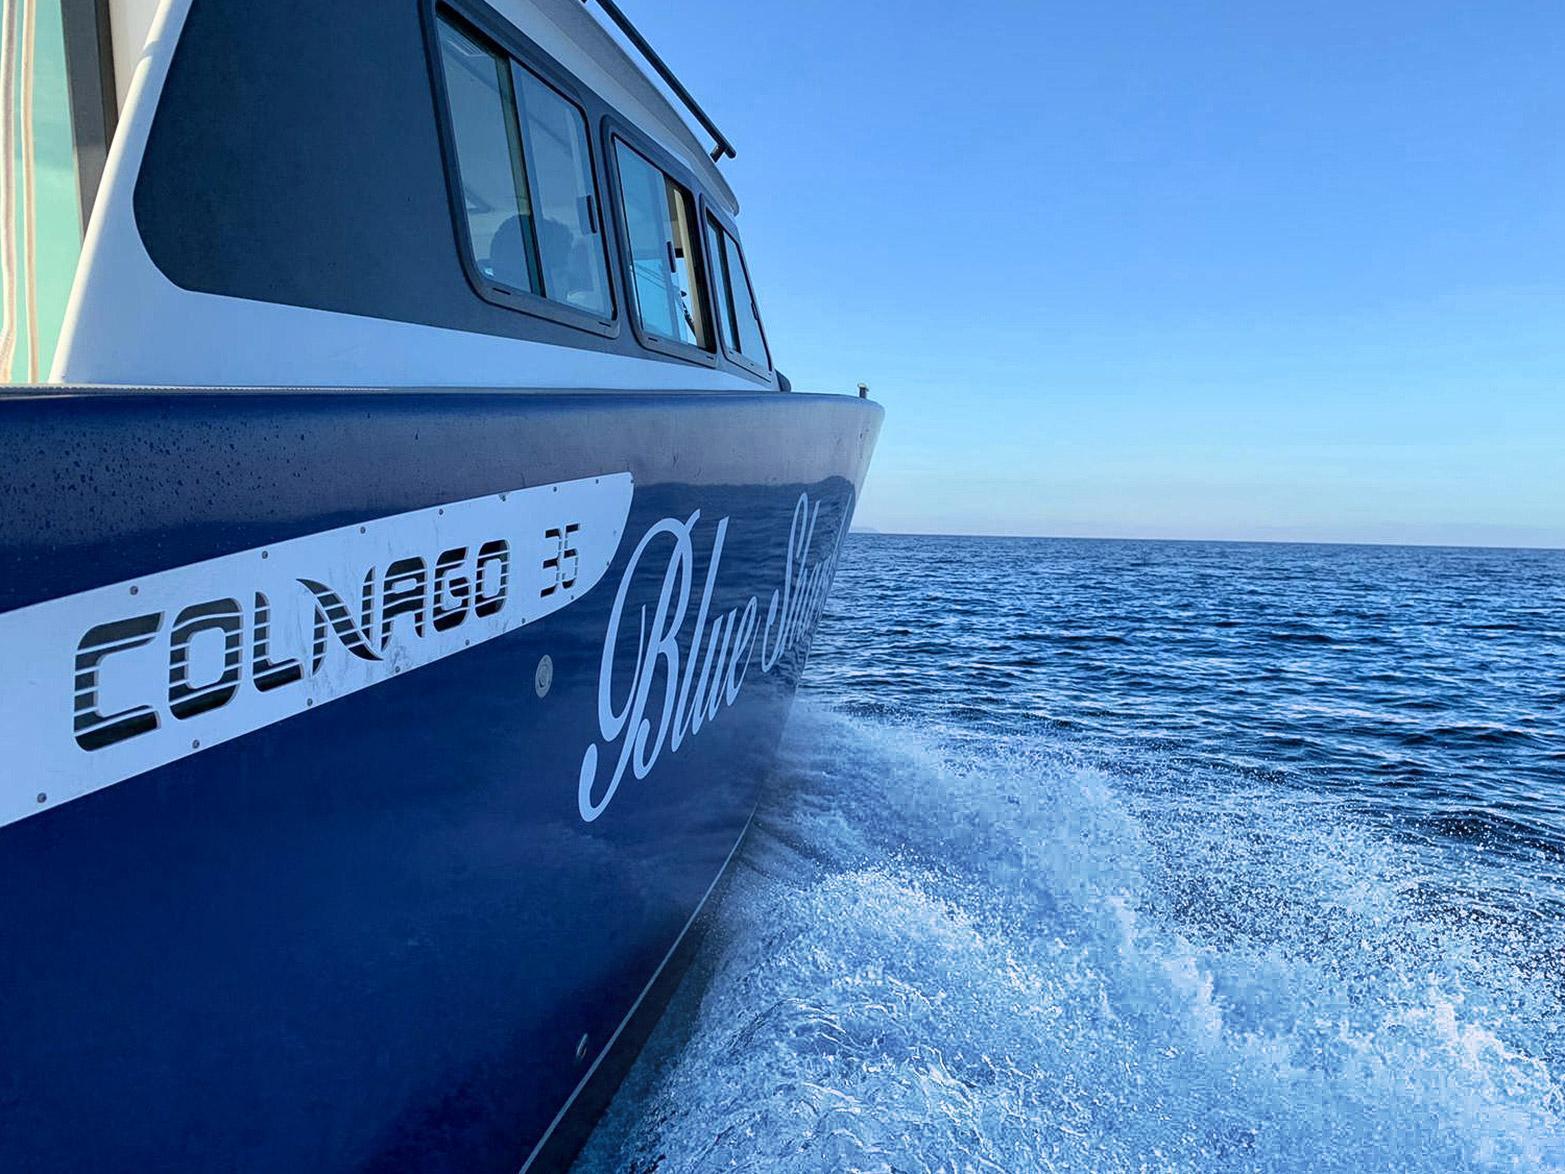 Blue Shark Colnago Boat on the route to Maslinica